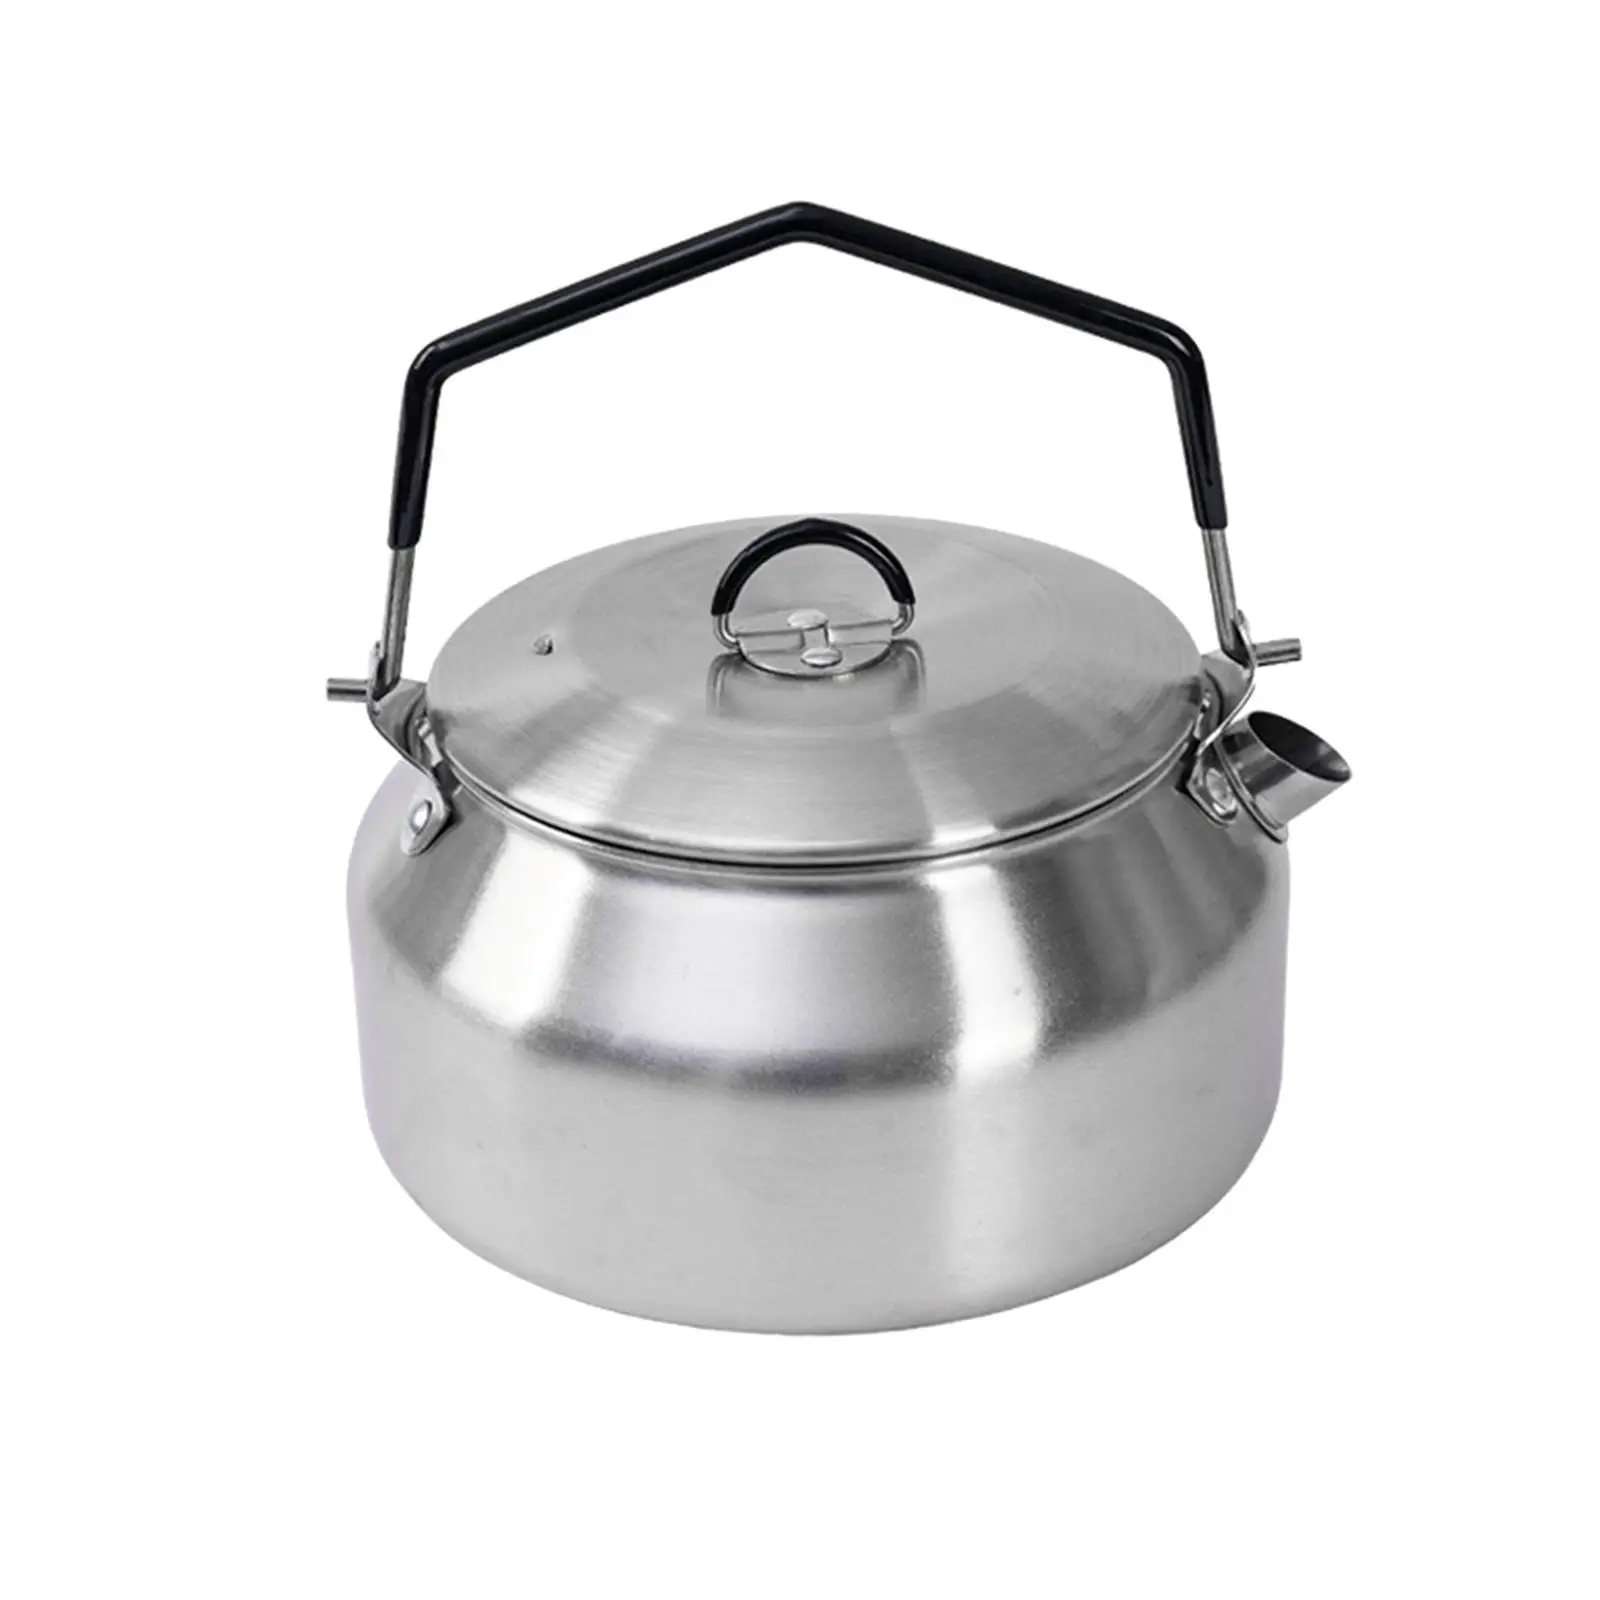 1L Camping Water Kettle Teapot Cook Pot Lightweight Anti Scald Handle Teakettle for Camp Mountaineering Fishing Campfire Travel